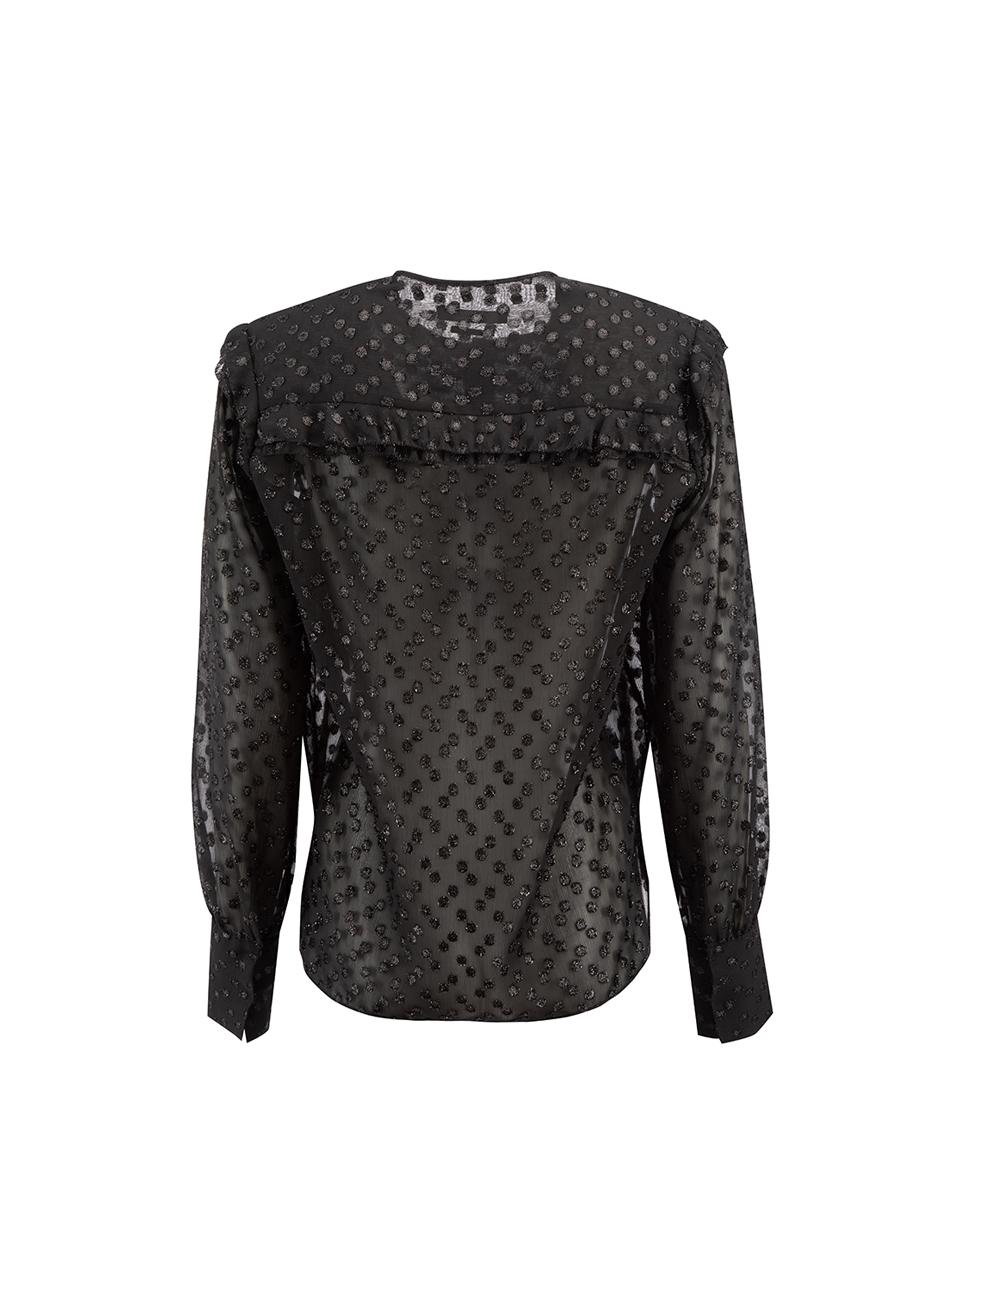 Isabel Marant Black Polkadot Sheer Blouse Size S In Good Condition In London, GB